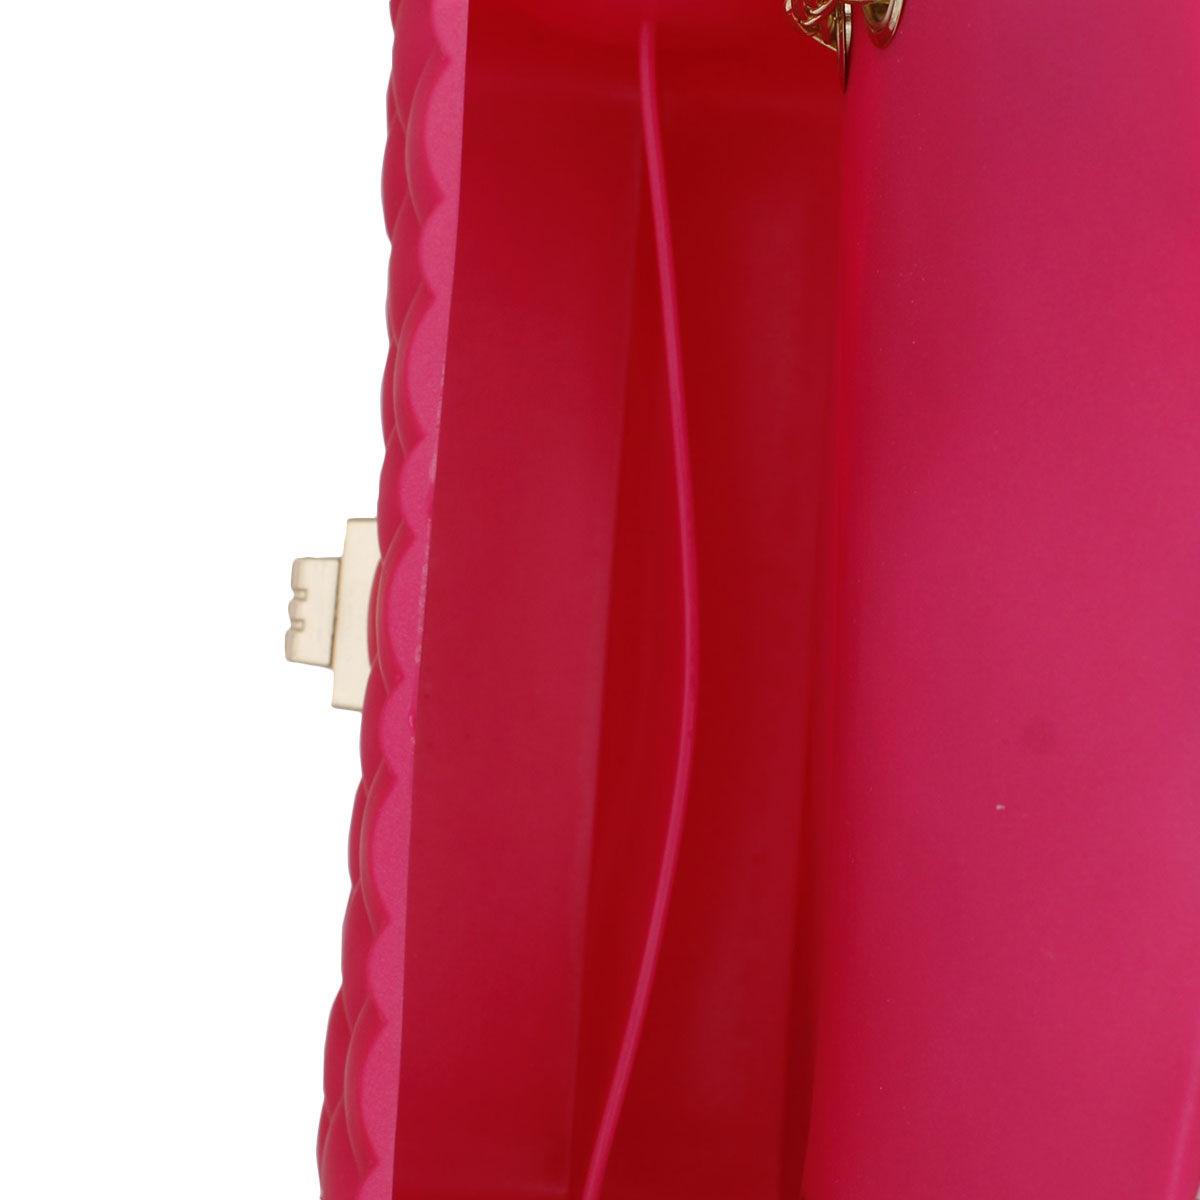 Make a Statement with a Stunning Fuchsia Quilted Jelly Crossbody Mini Bag